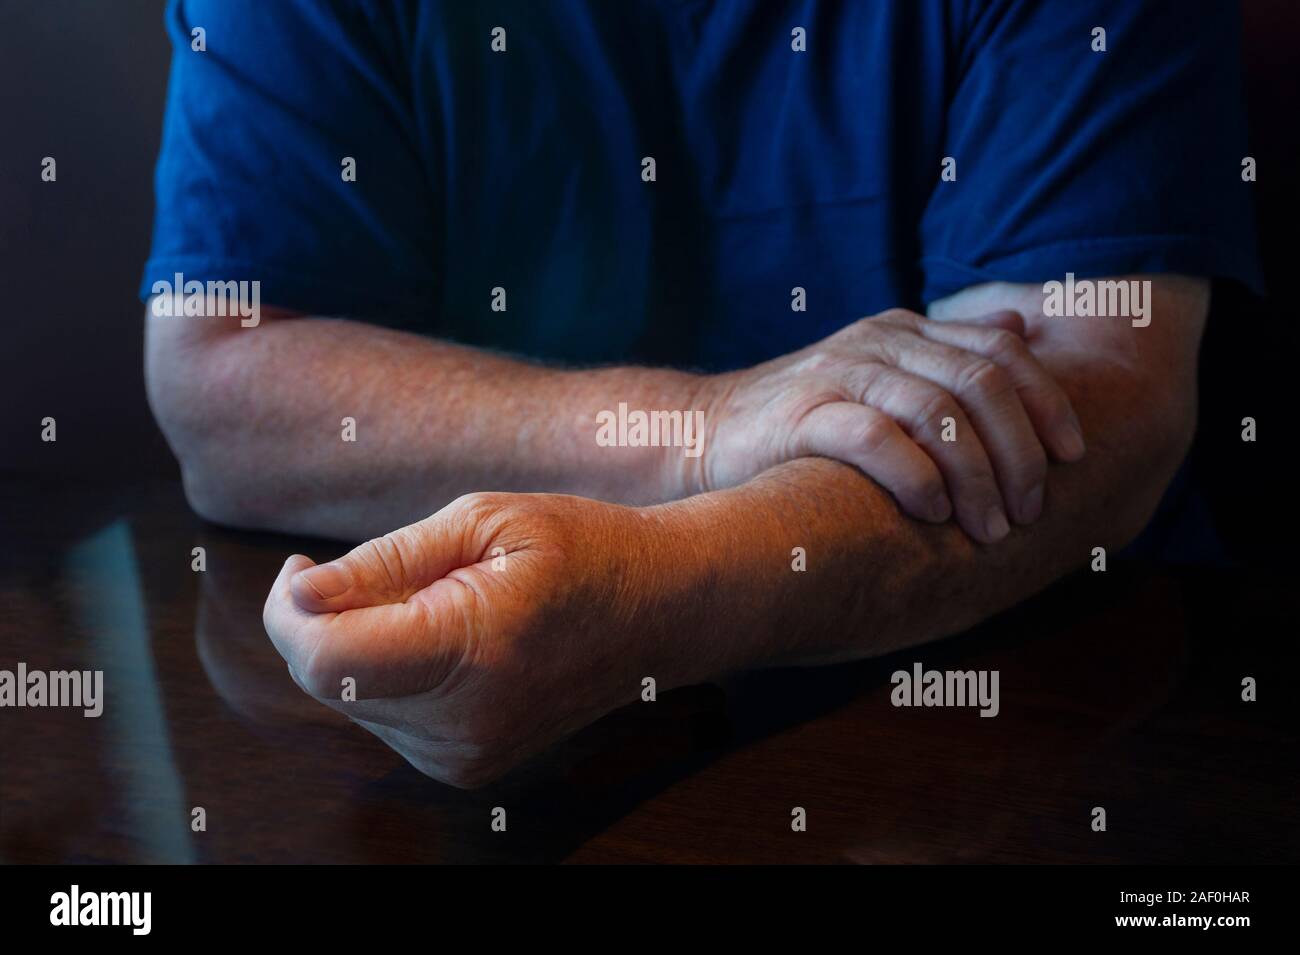 man communicating with hand gestures Stock Photo